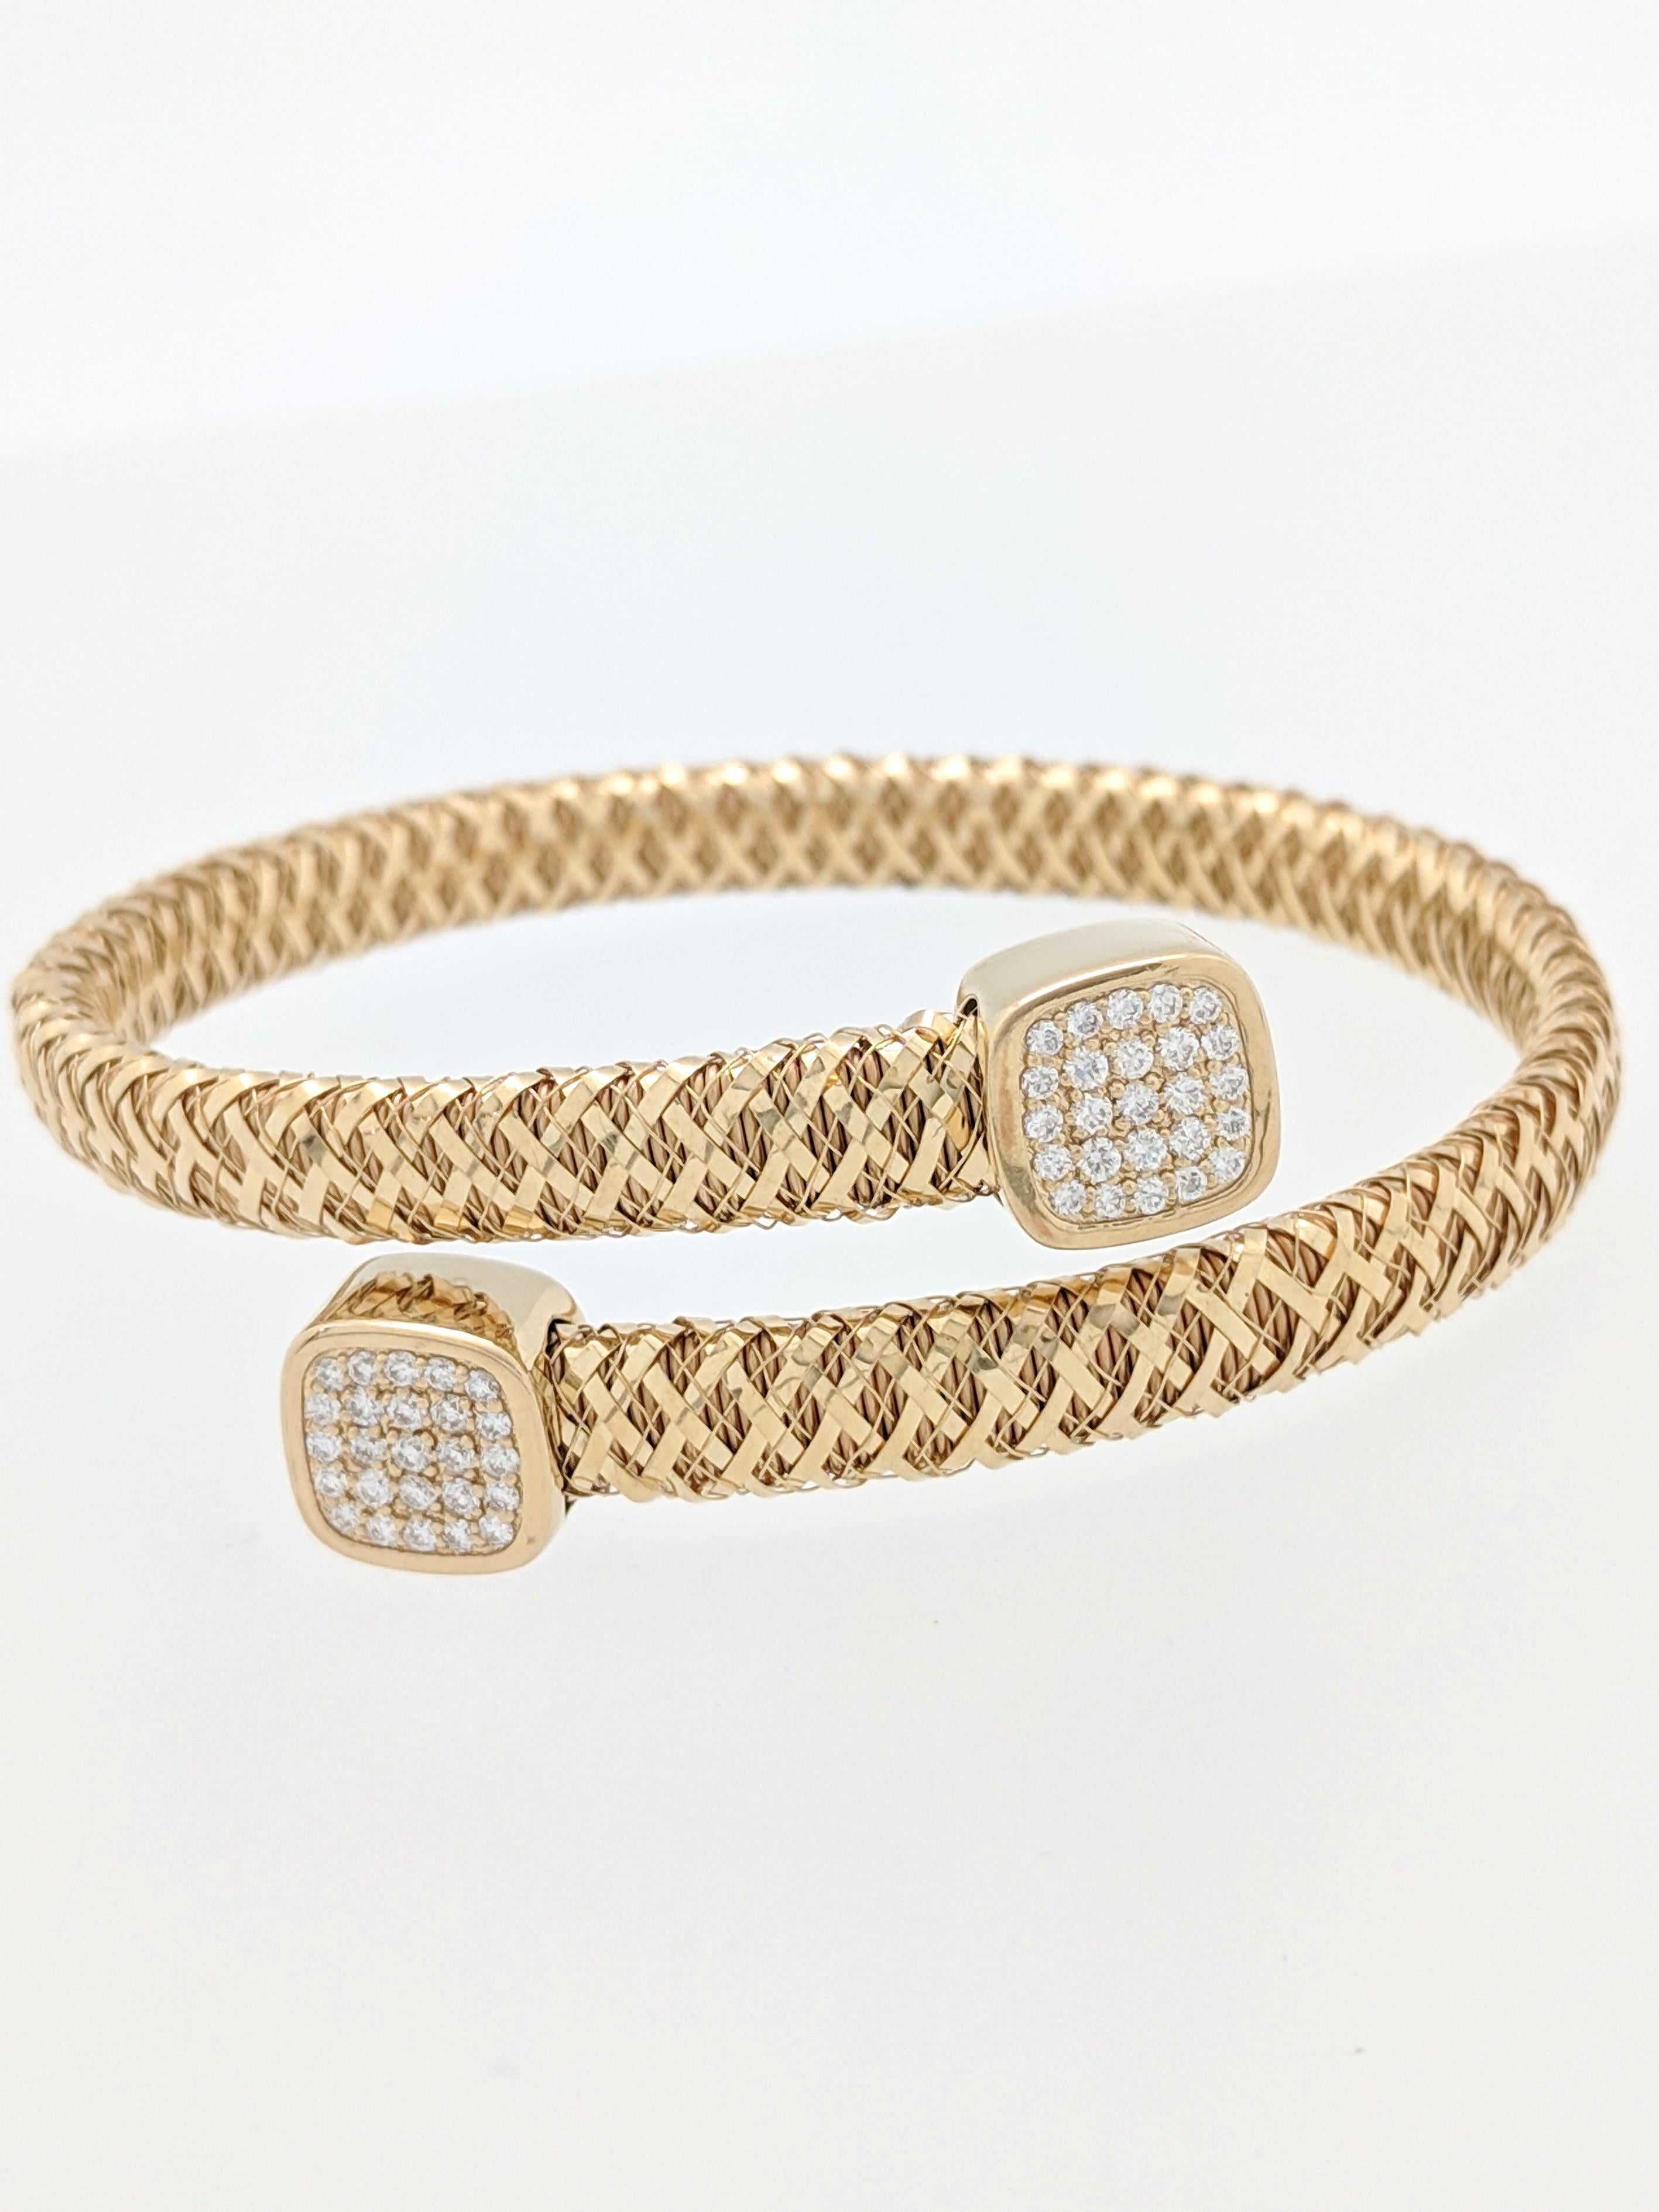 Roberto Coin 18K Yellow Gold Primavera Diamond Capped Bangle

You are viewing a stunning authentic Roberto Coin Primavera Diamond Capped Bangle. Any woman would love to add this piece to their collection!!

The bracelet is crafted from 18k yellow